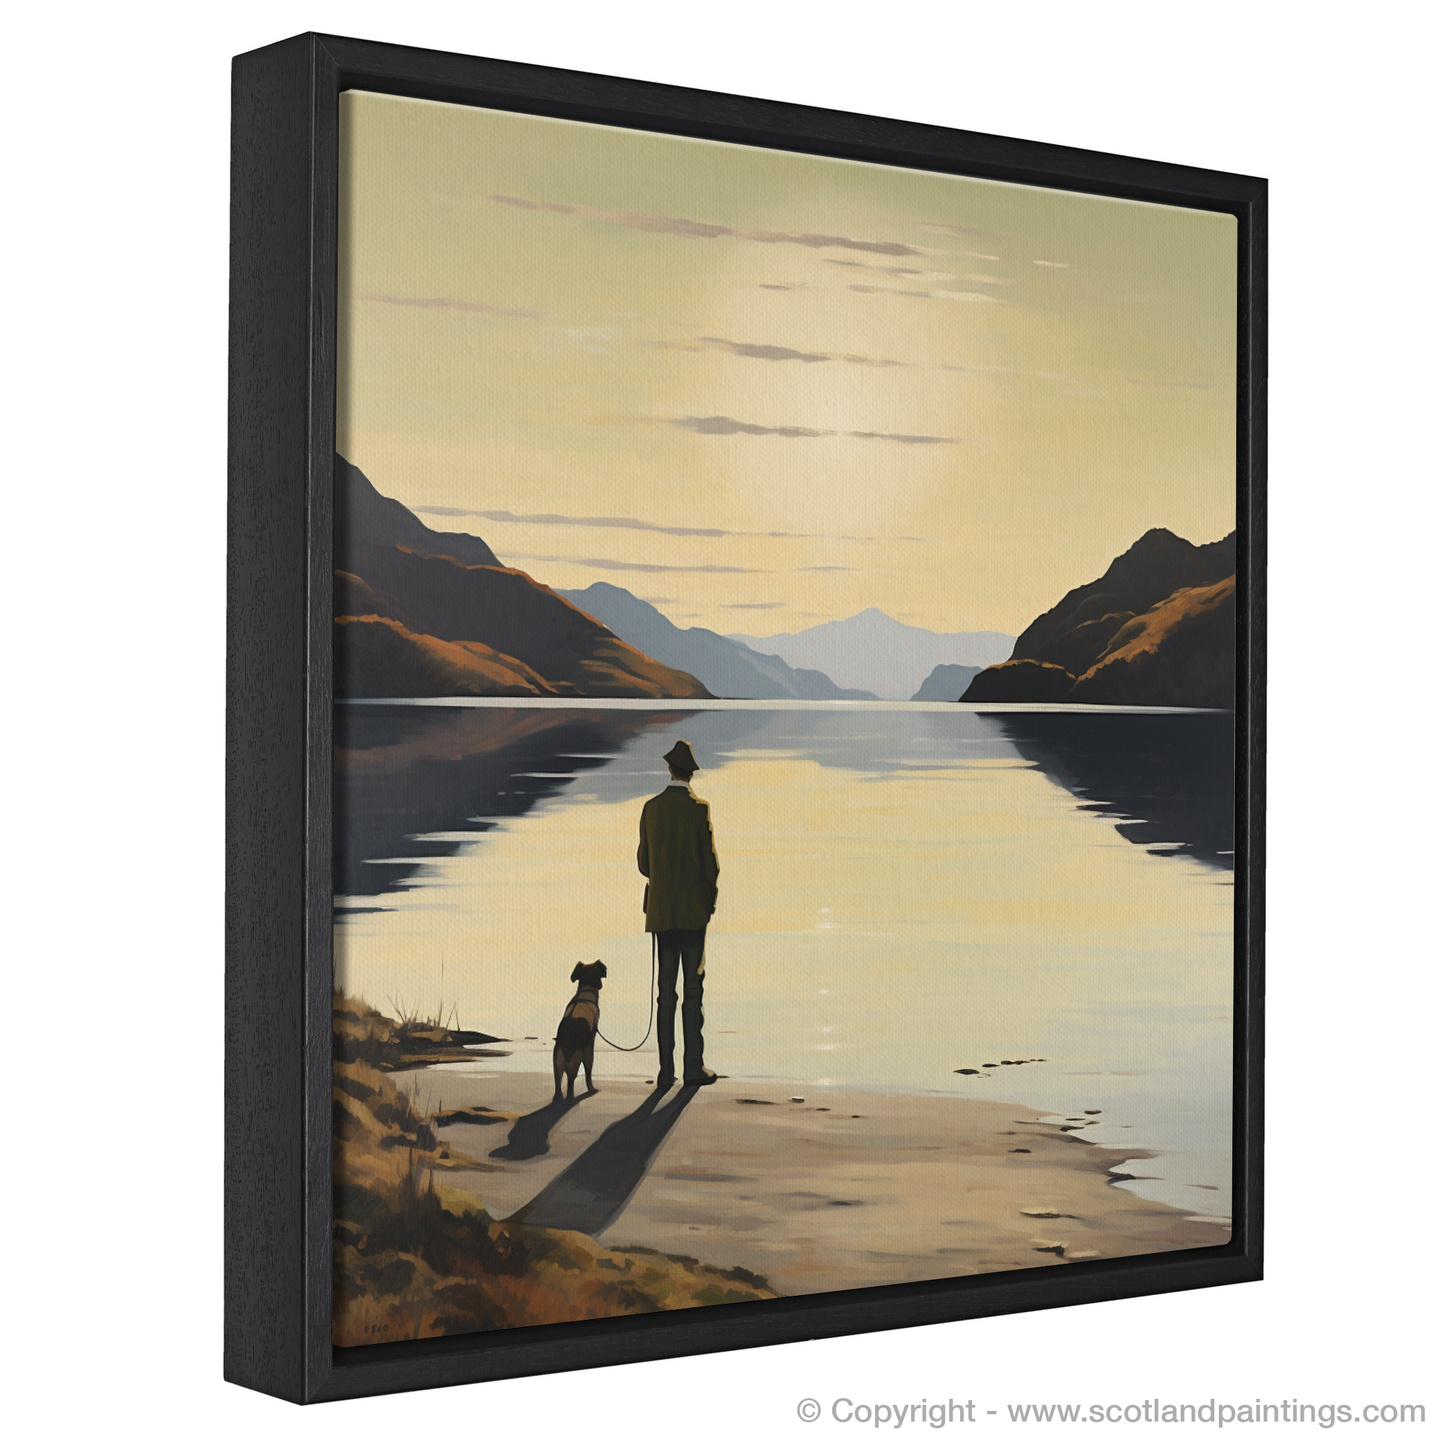 Painting and Art Print of A man walking dog at the side of Loch Lomond entitled "Evening Stroll by Loch Lomond".